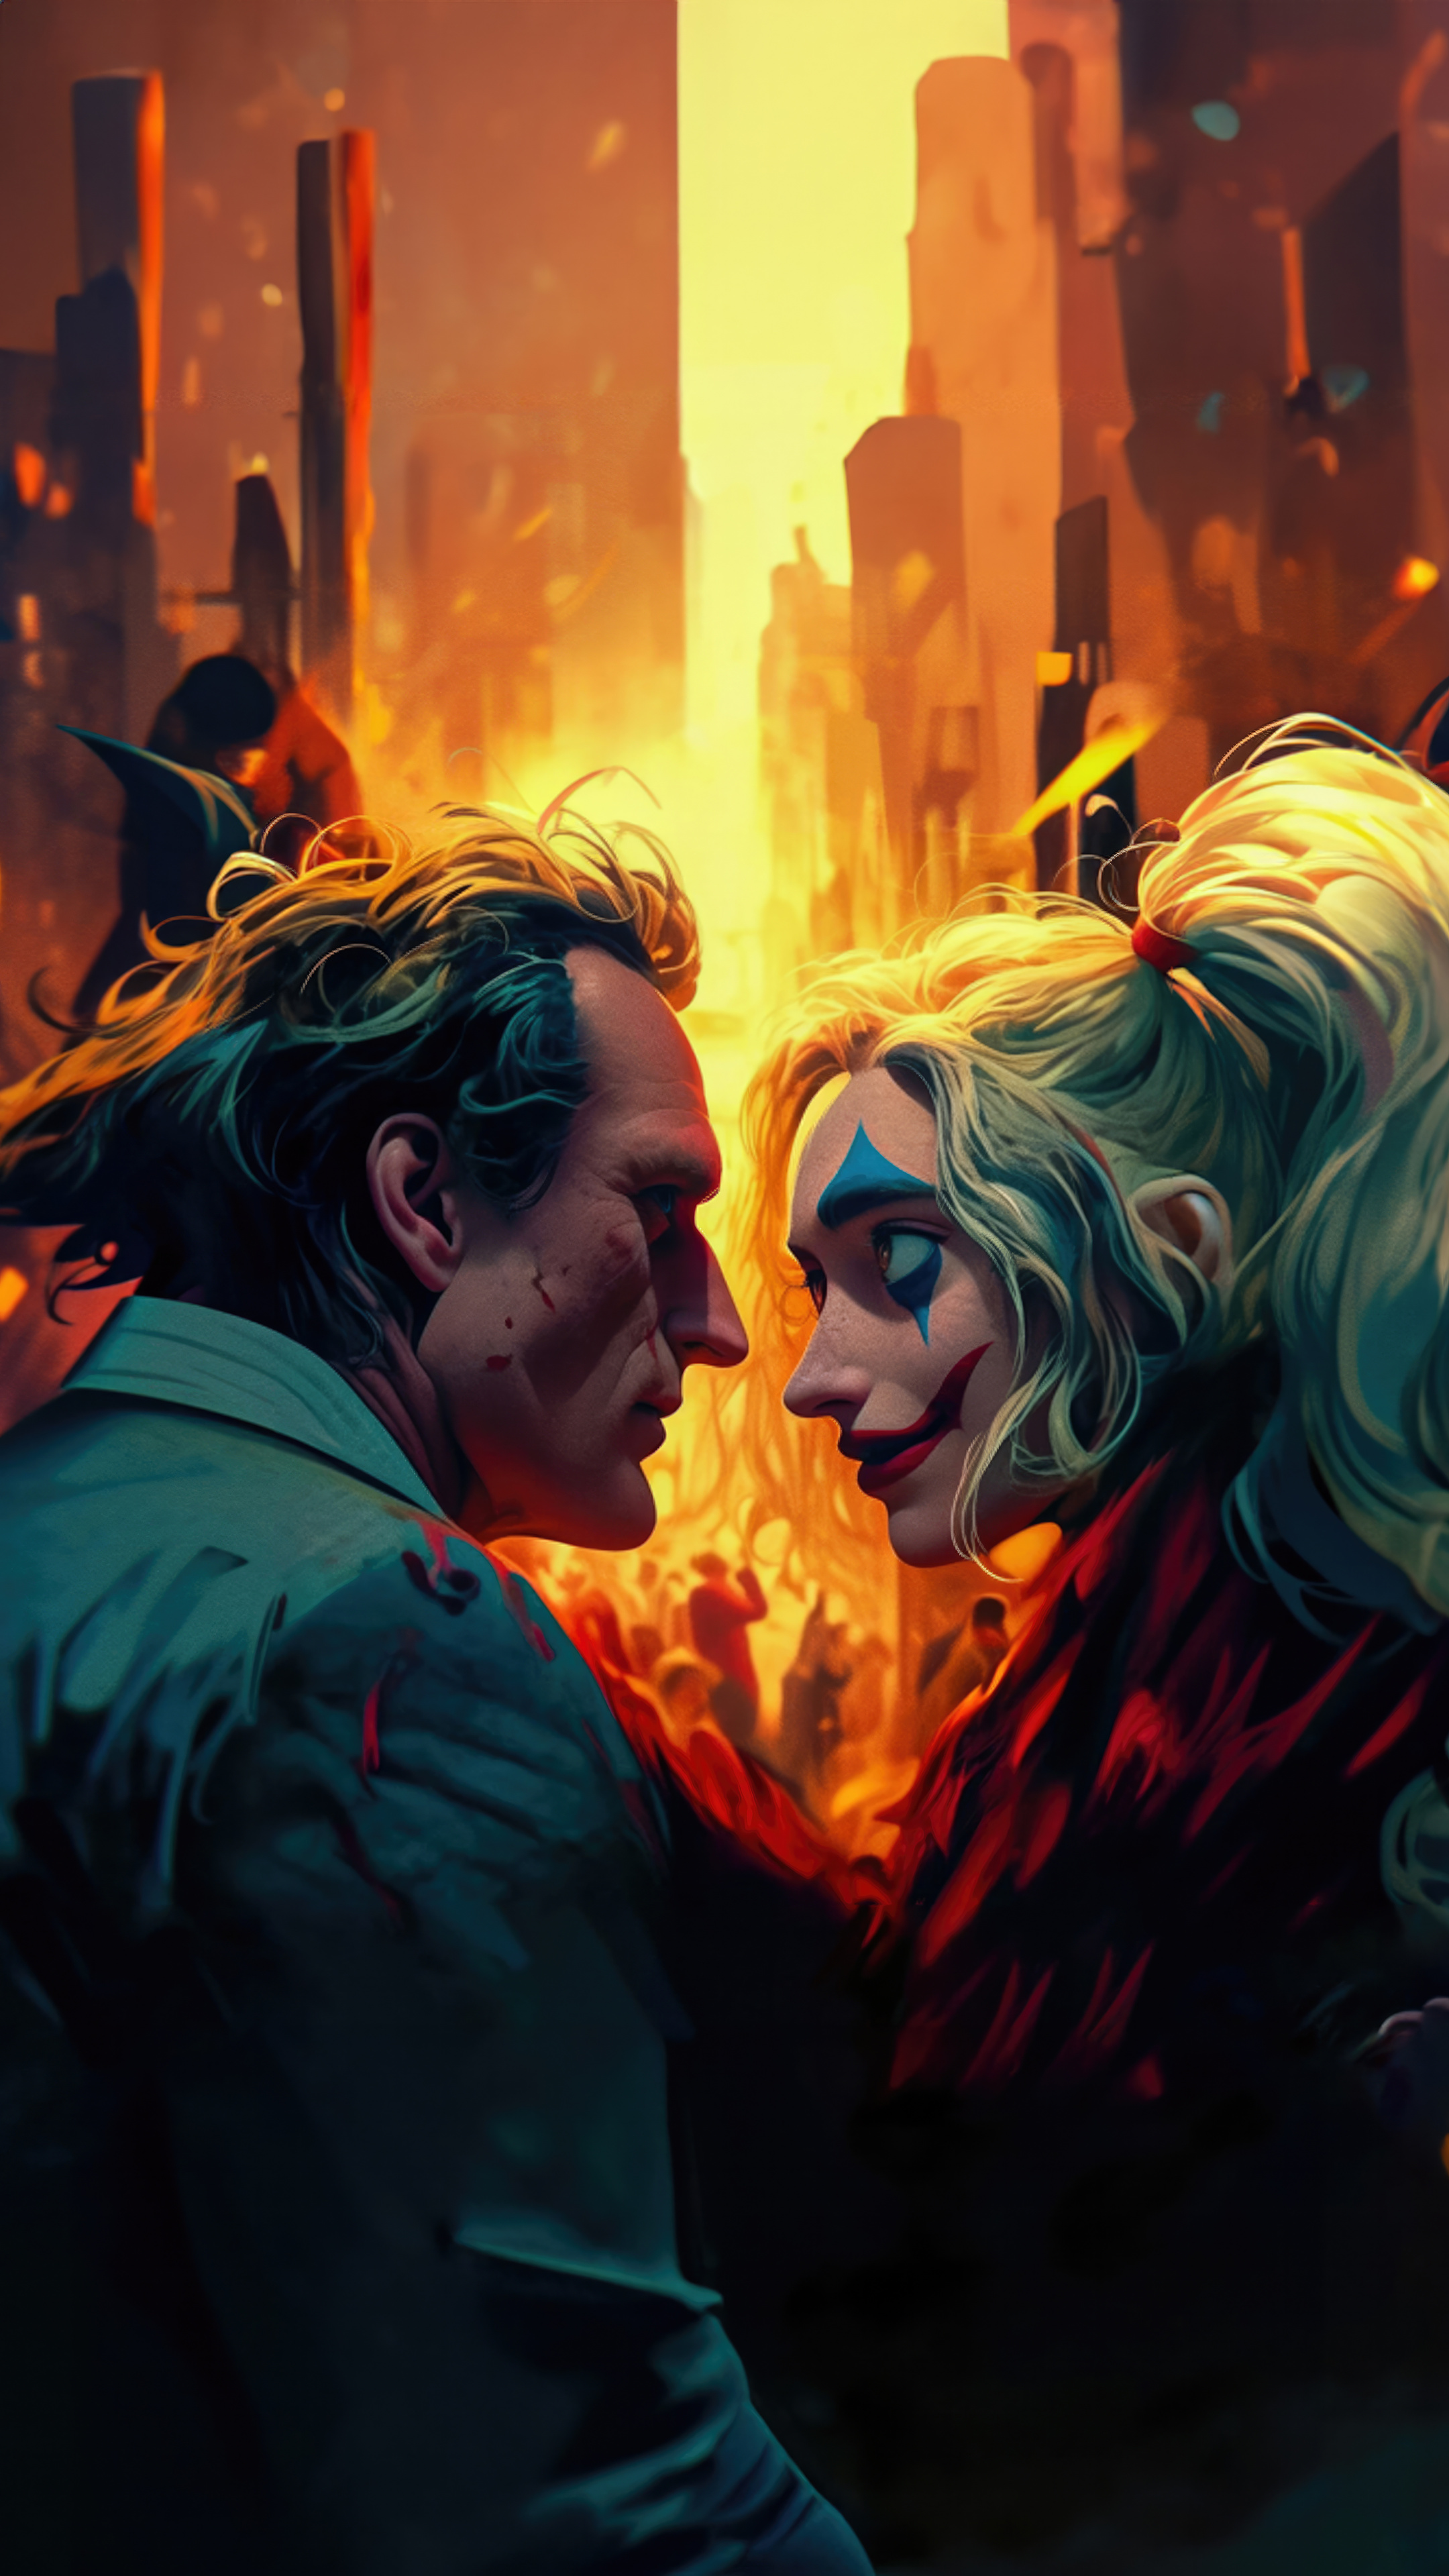 2160x3840 Joker And Harley Quinn Chaotic Affection Sony Xperia X Xz Z5 Premium Hd 4k Wallpapers